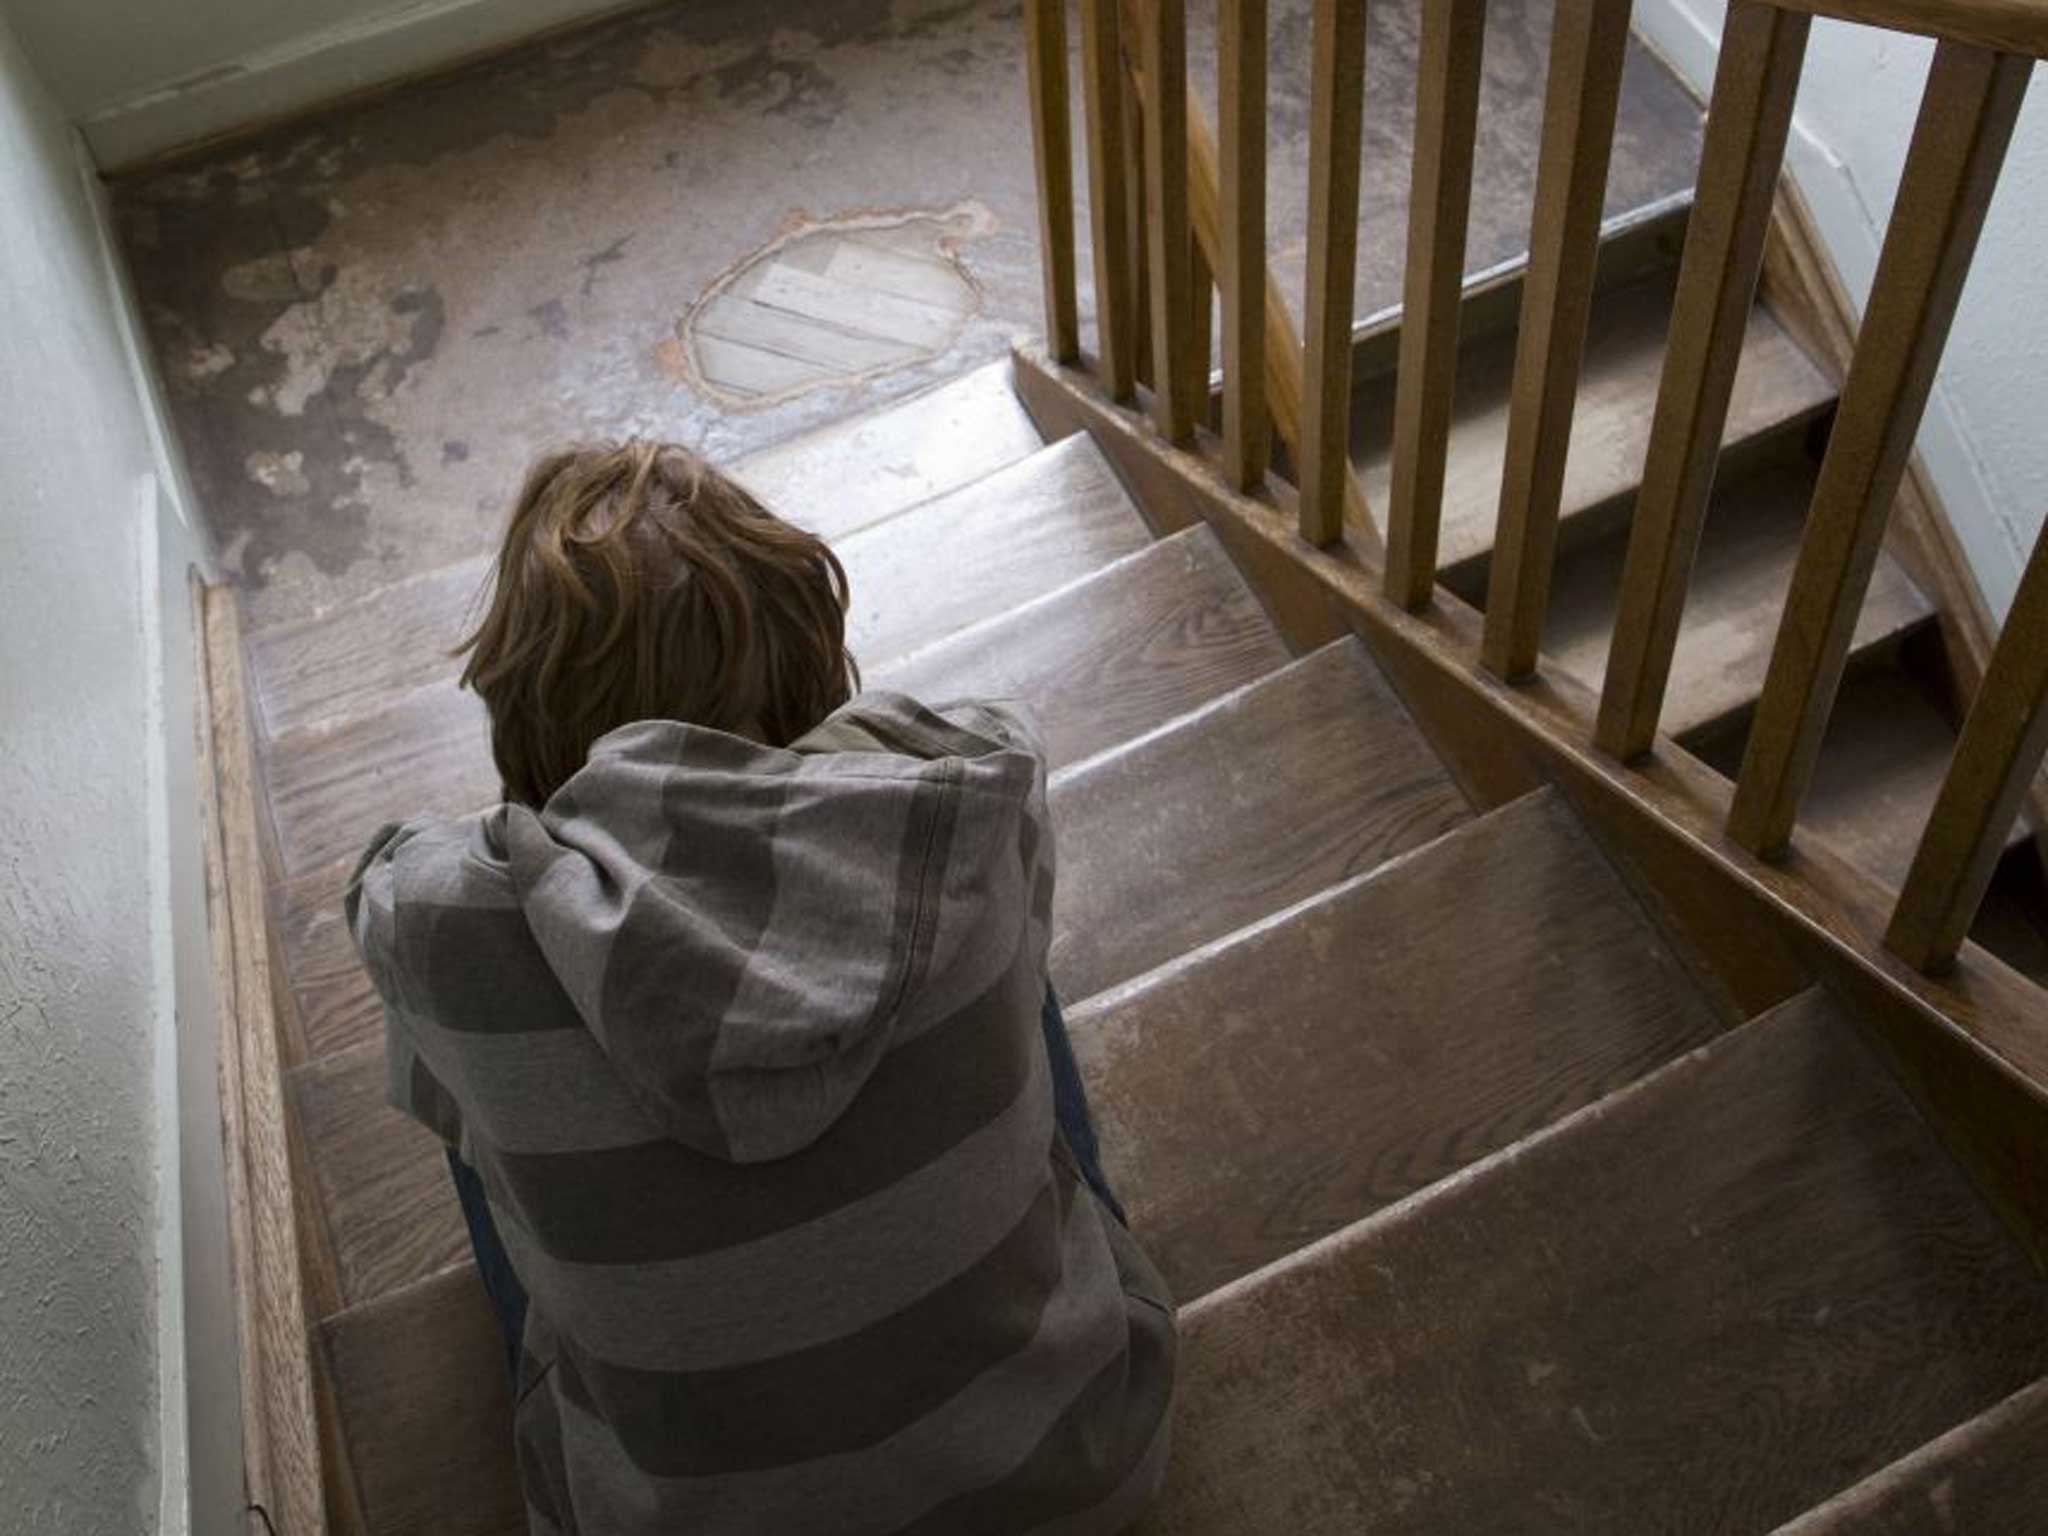 Two-thirds of rescued children go missing once they are back in care homes